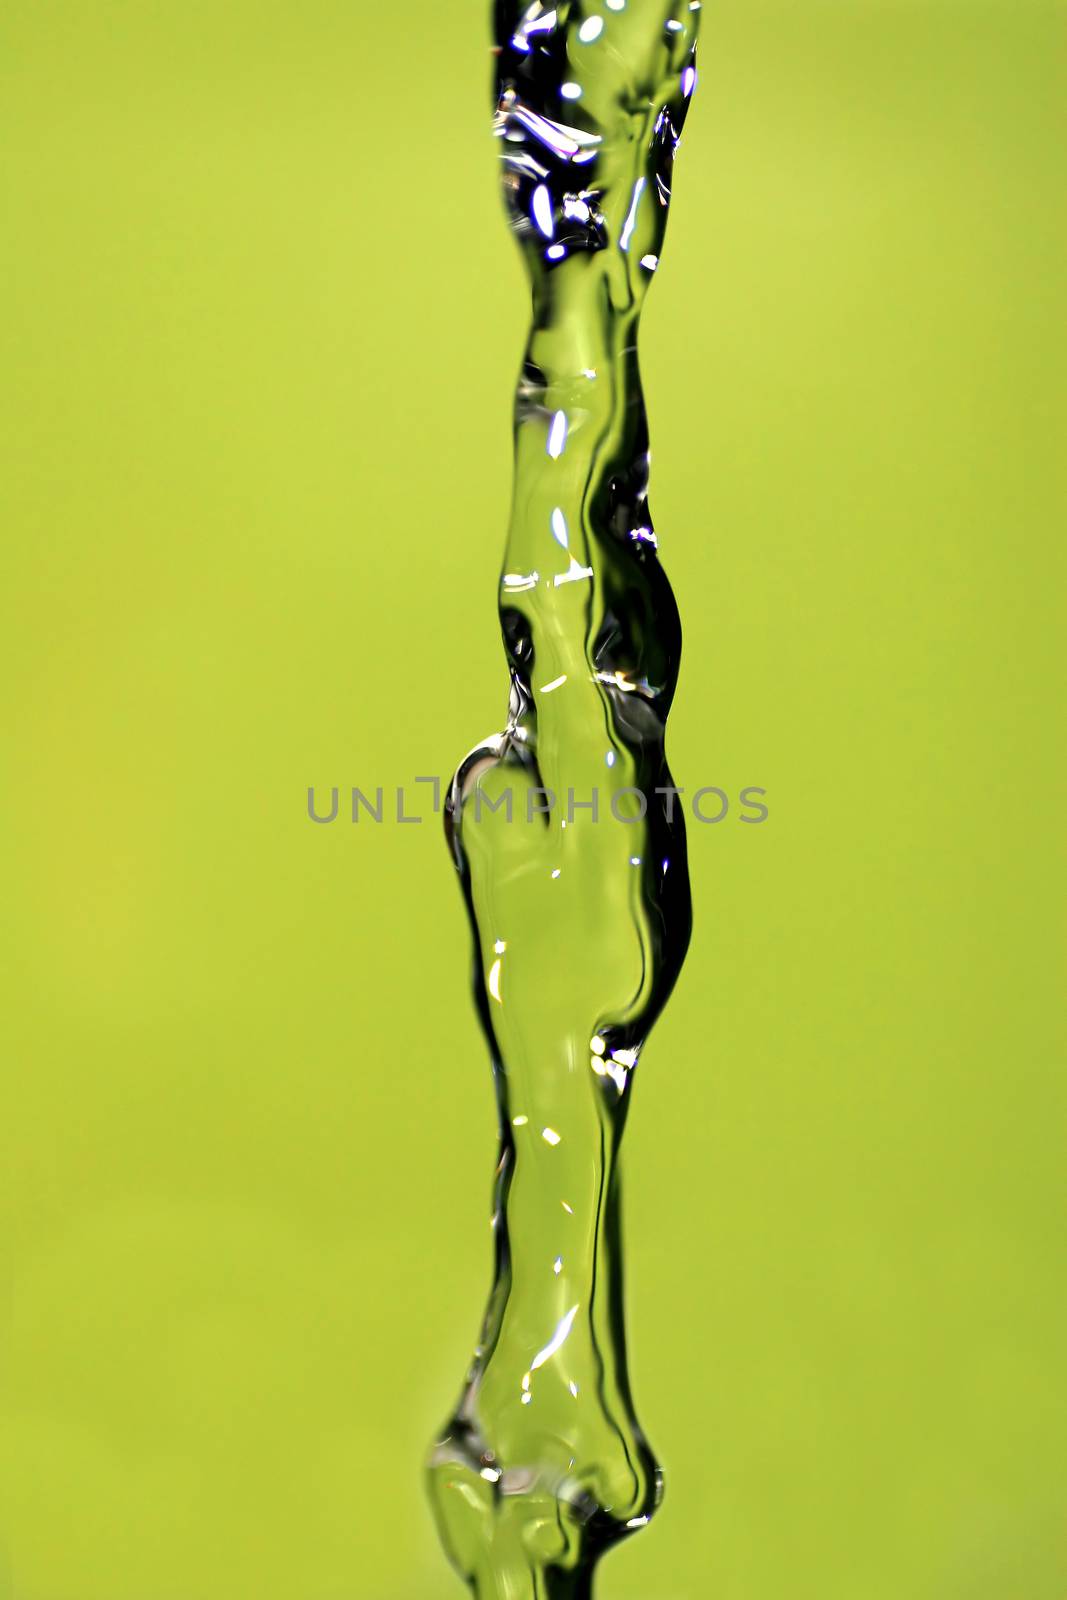 Water falling down, frozen in time with yellow background.